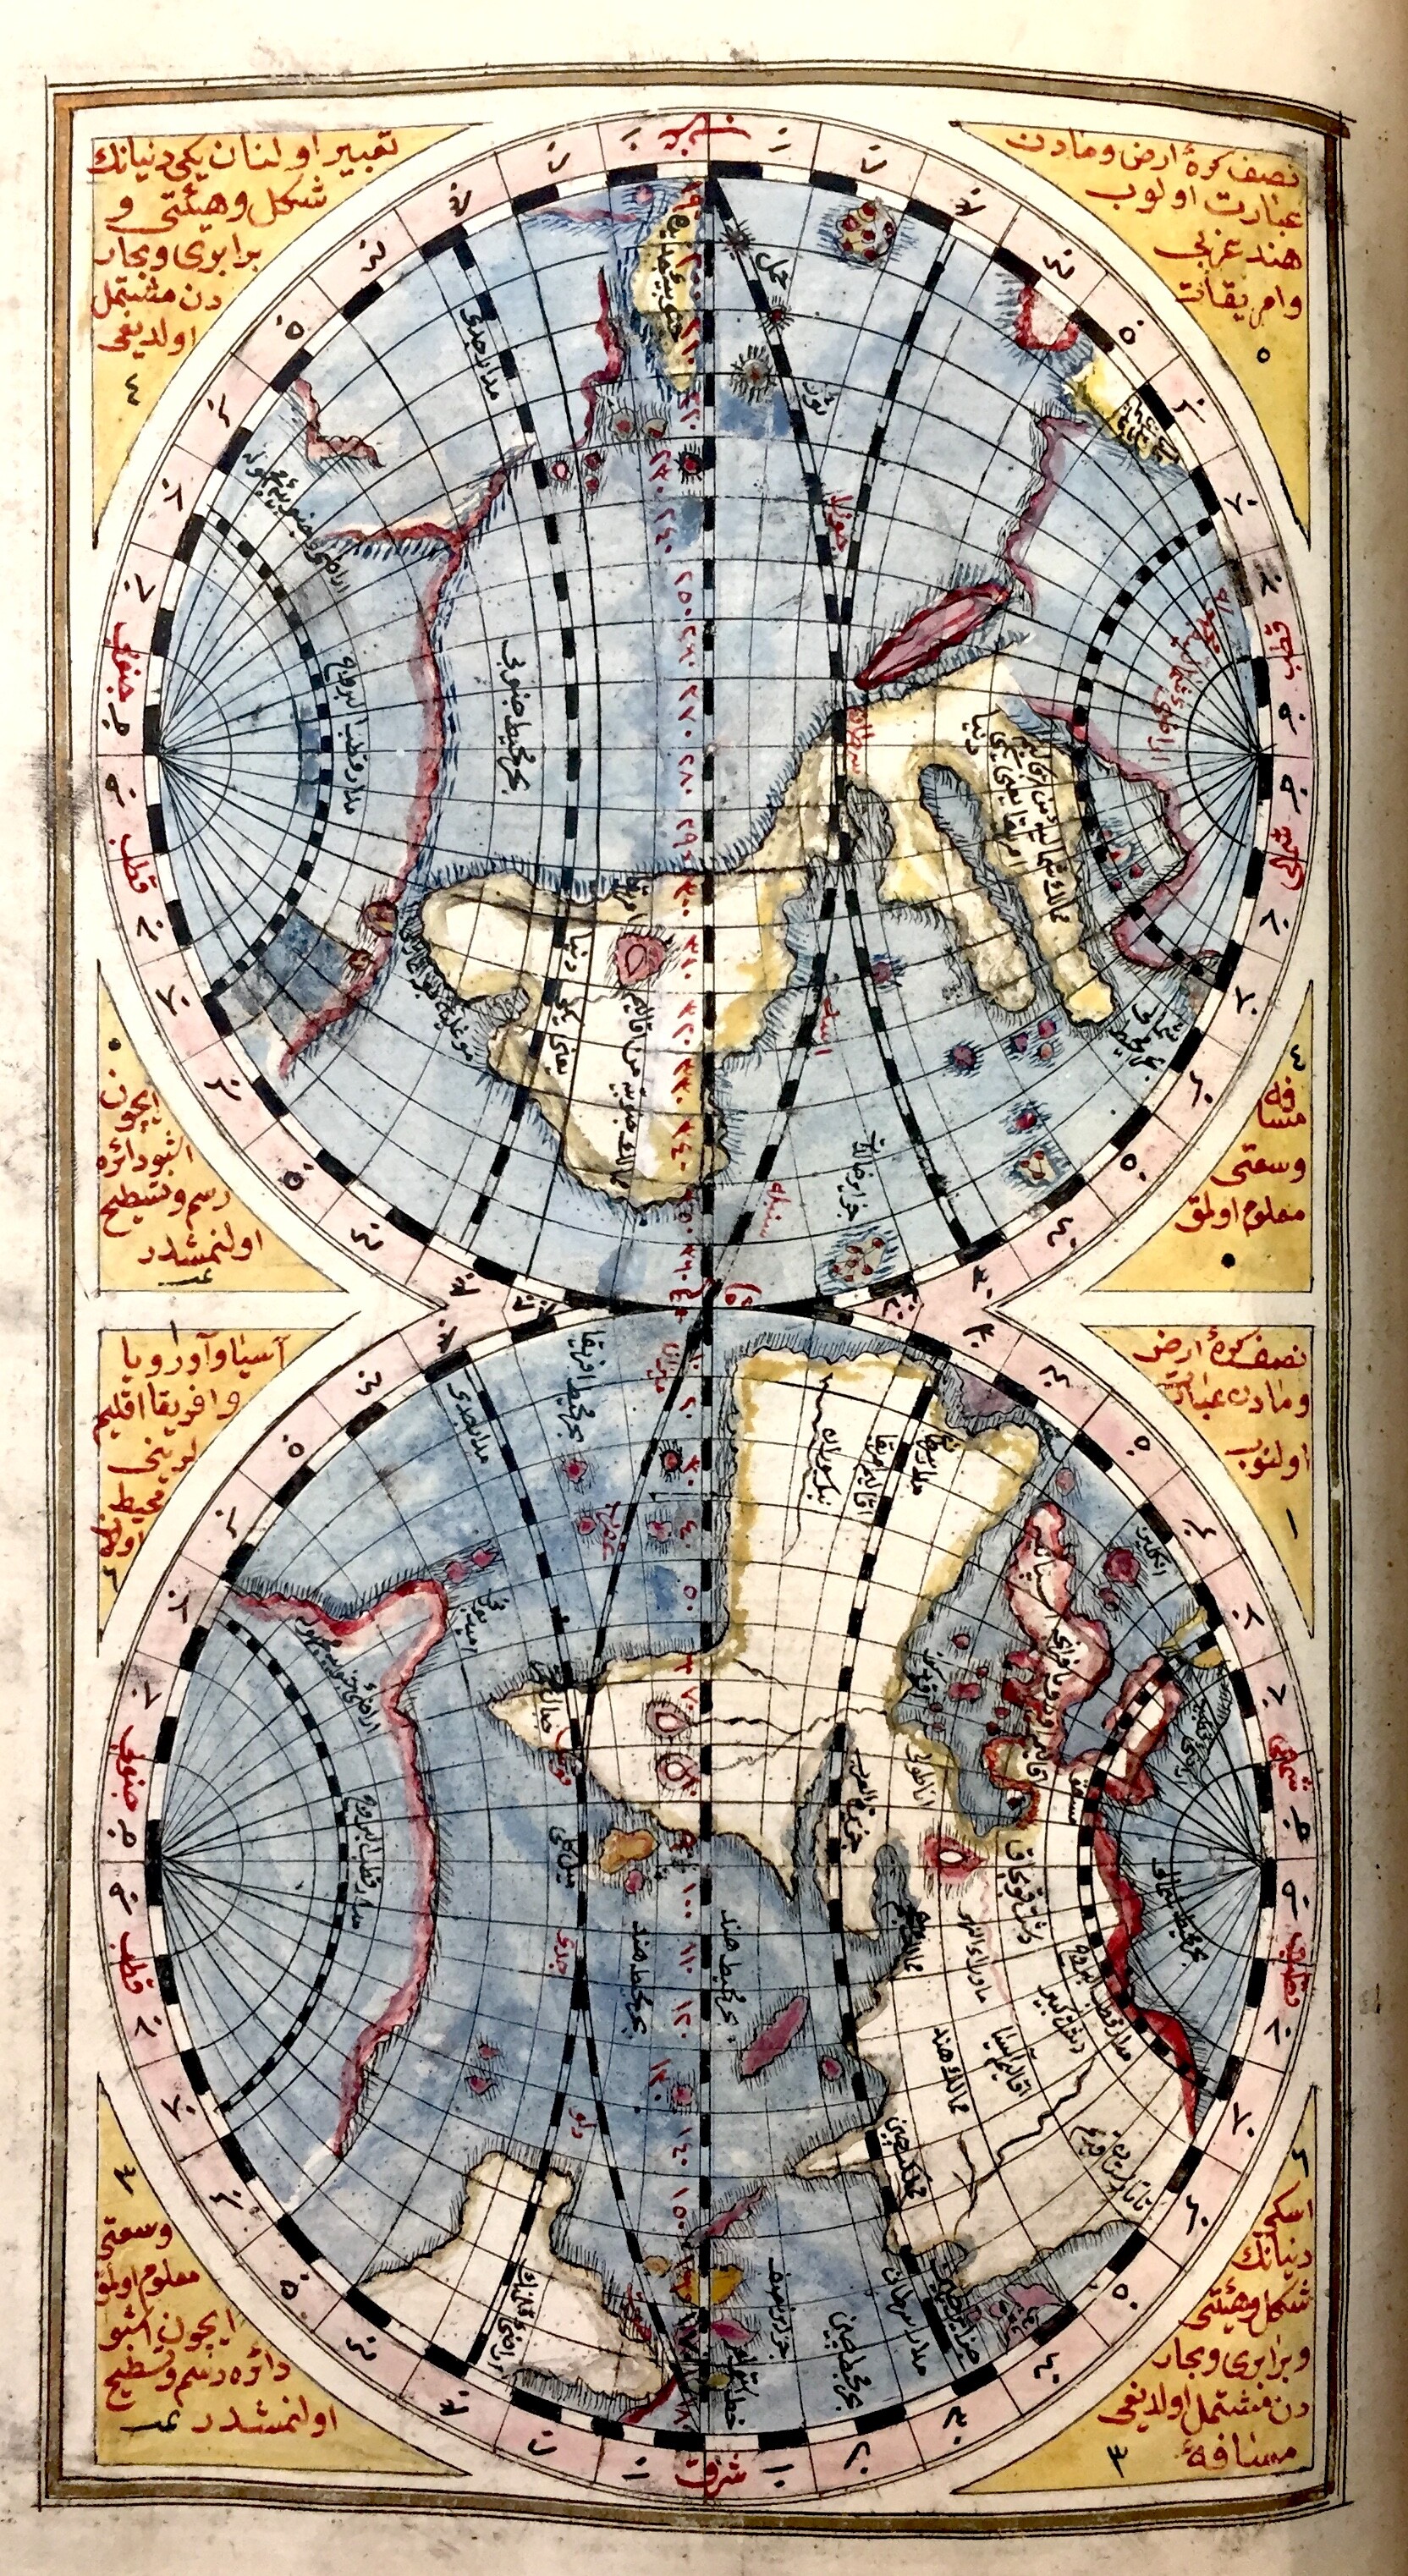 A manuscript illustration depicting a map of the world as two lobes oriented vertically.